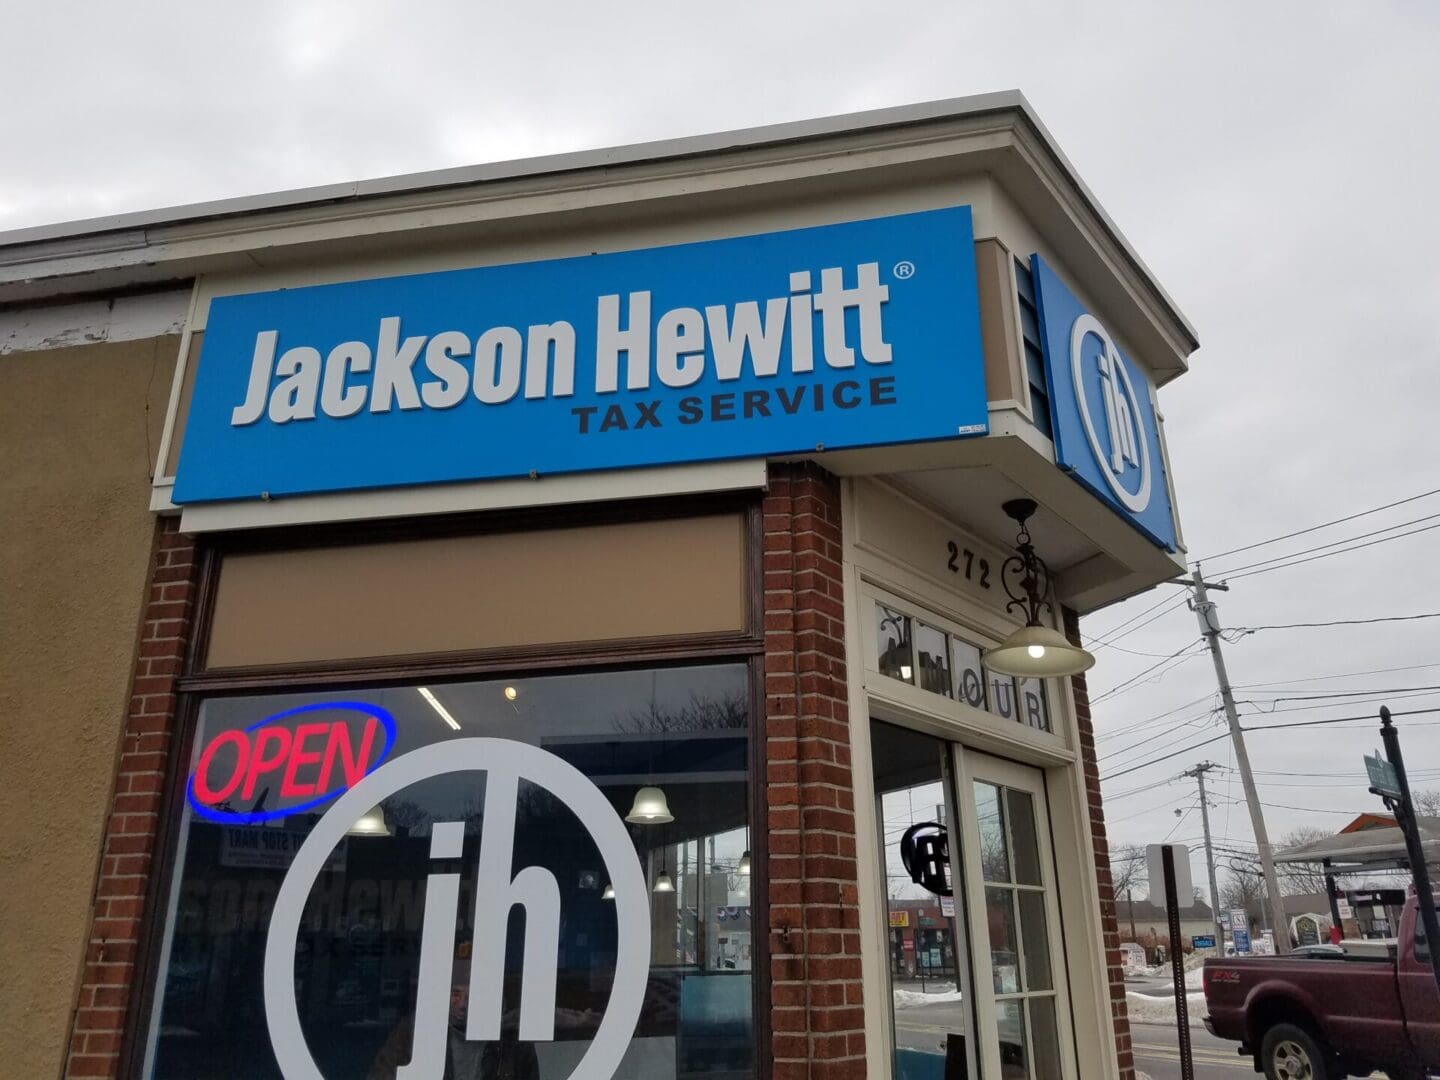 Storefront of a Jackson Hewitt tax service office with a blue sign, located on a cloudy day at ADP USA Solutions Gallery.